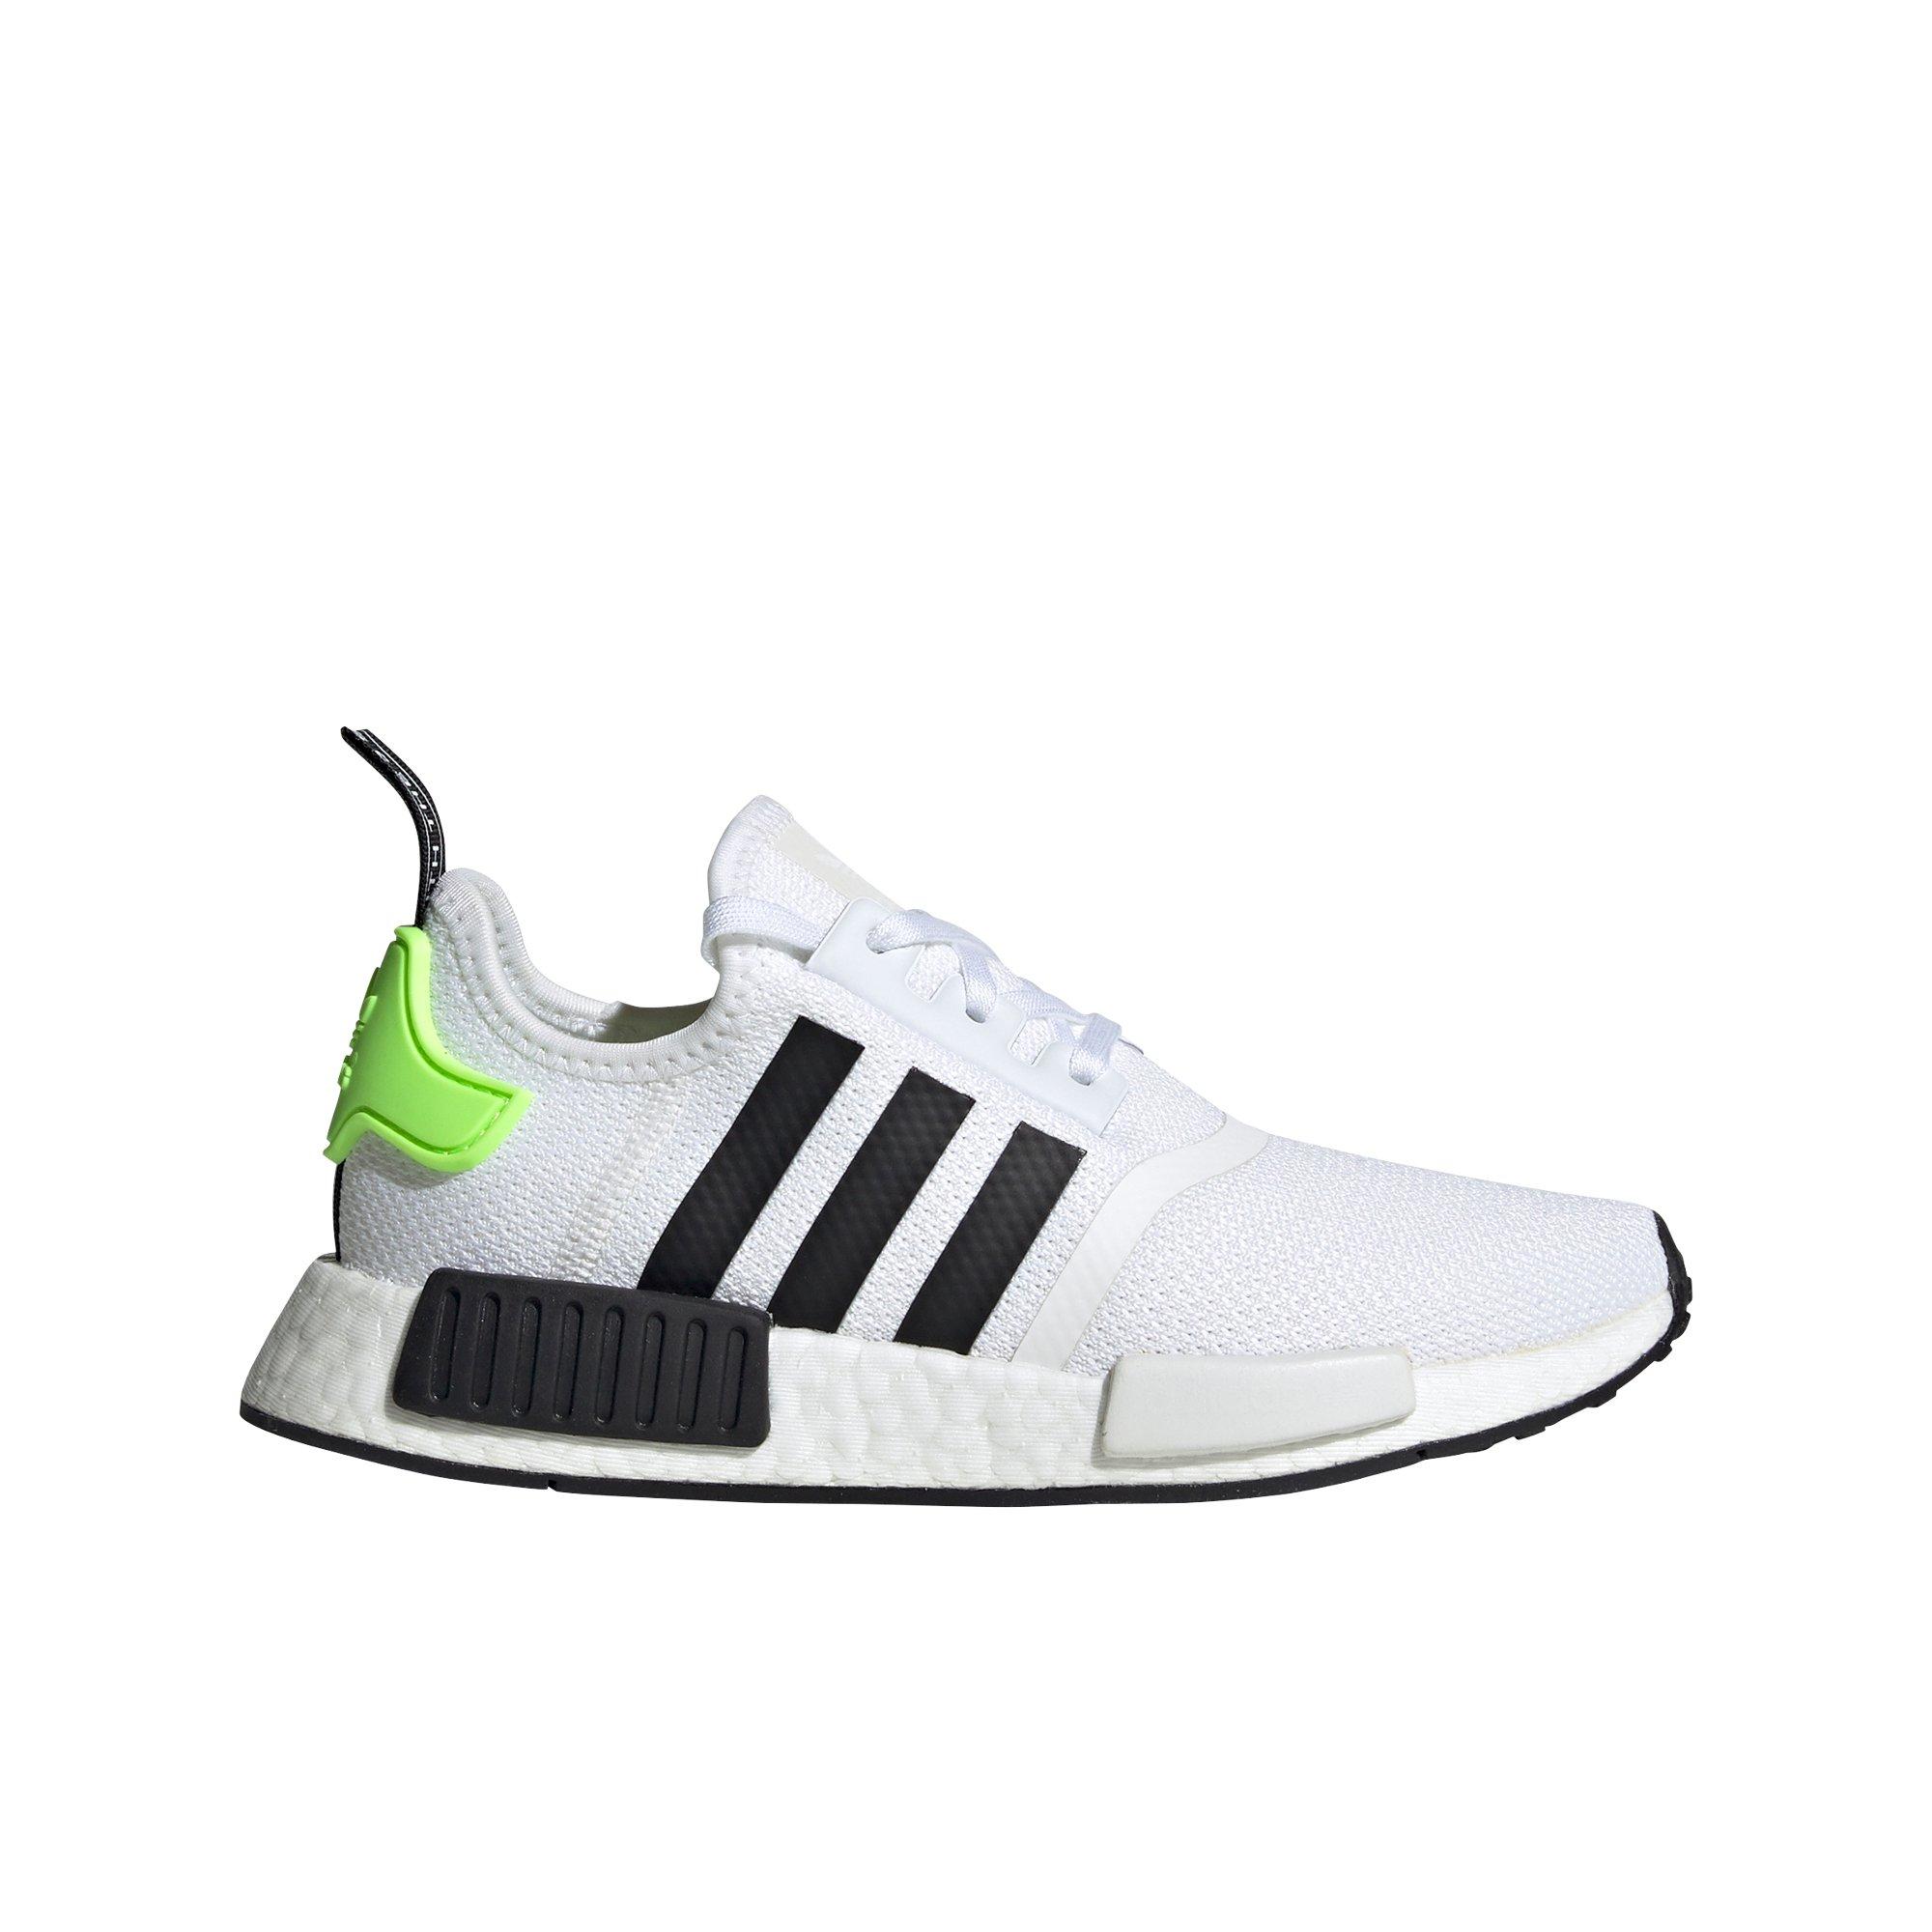 nmd r1 lime green